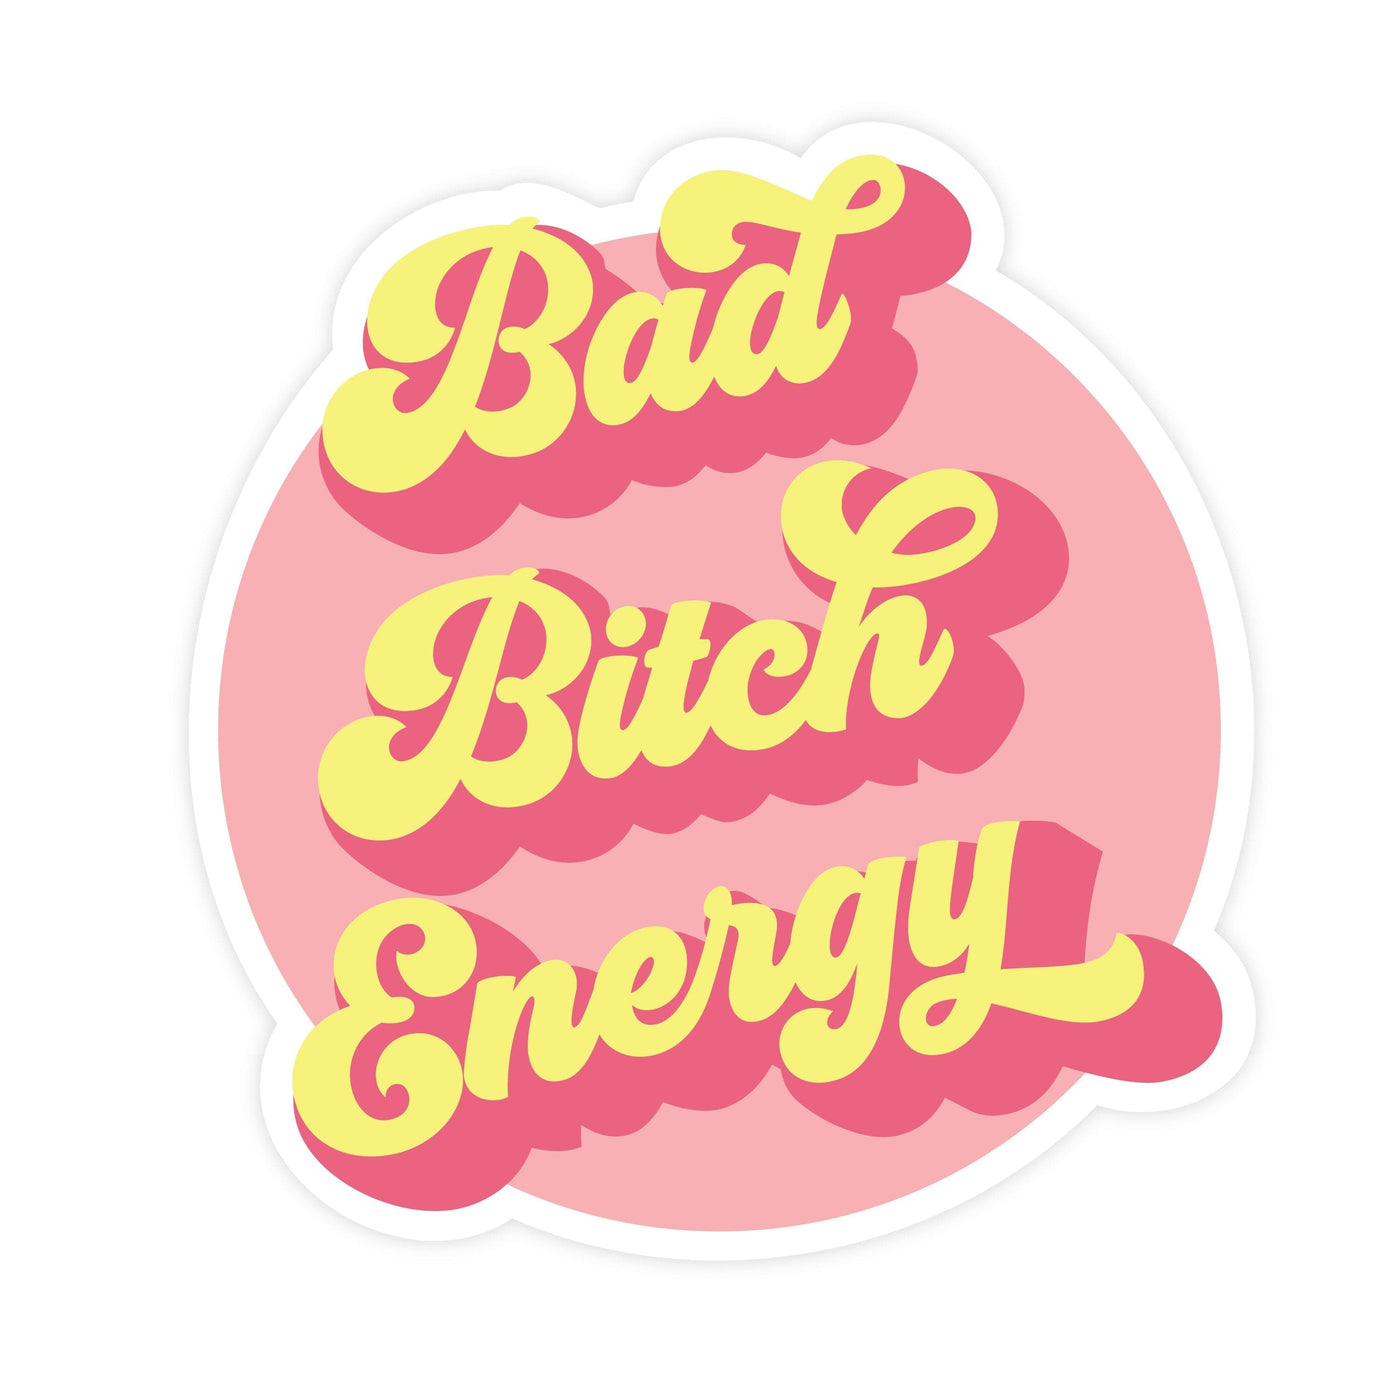 Bad Bitch Energy | Sticker - The Local Space